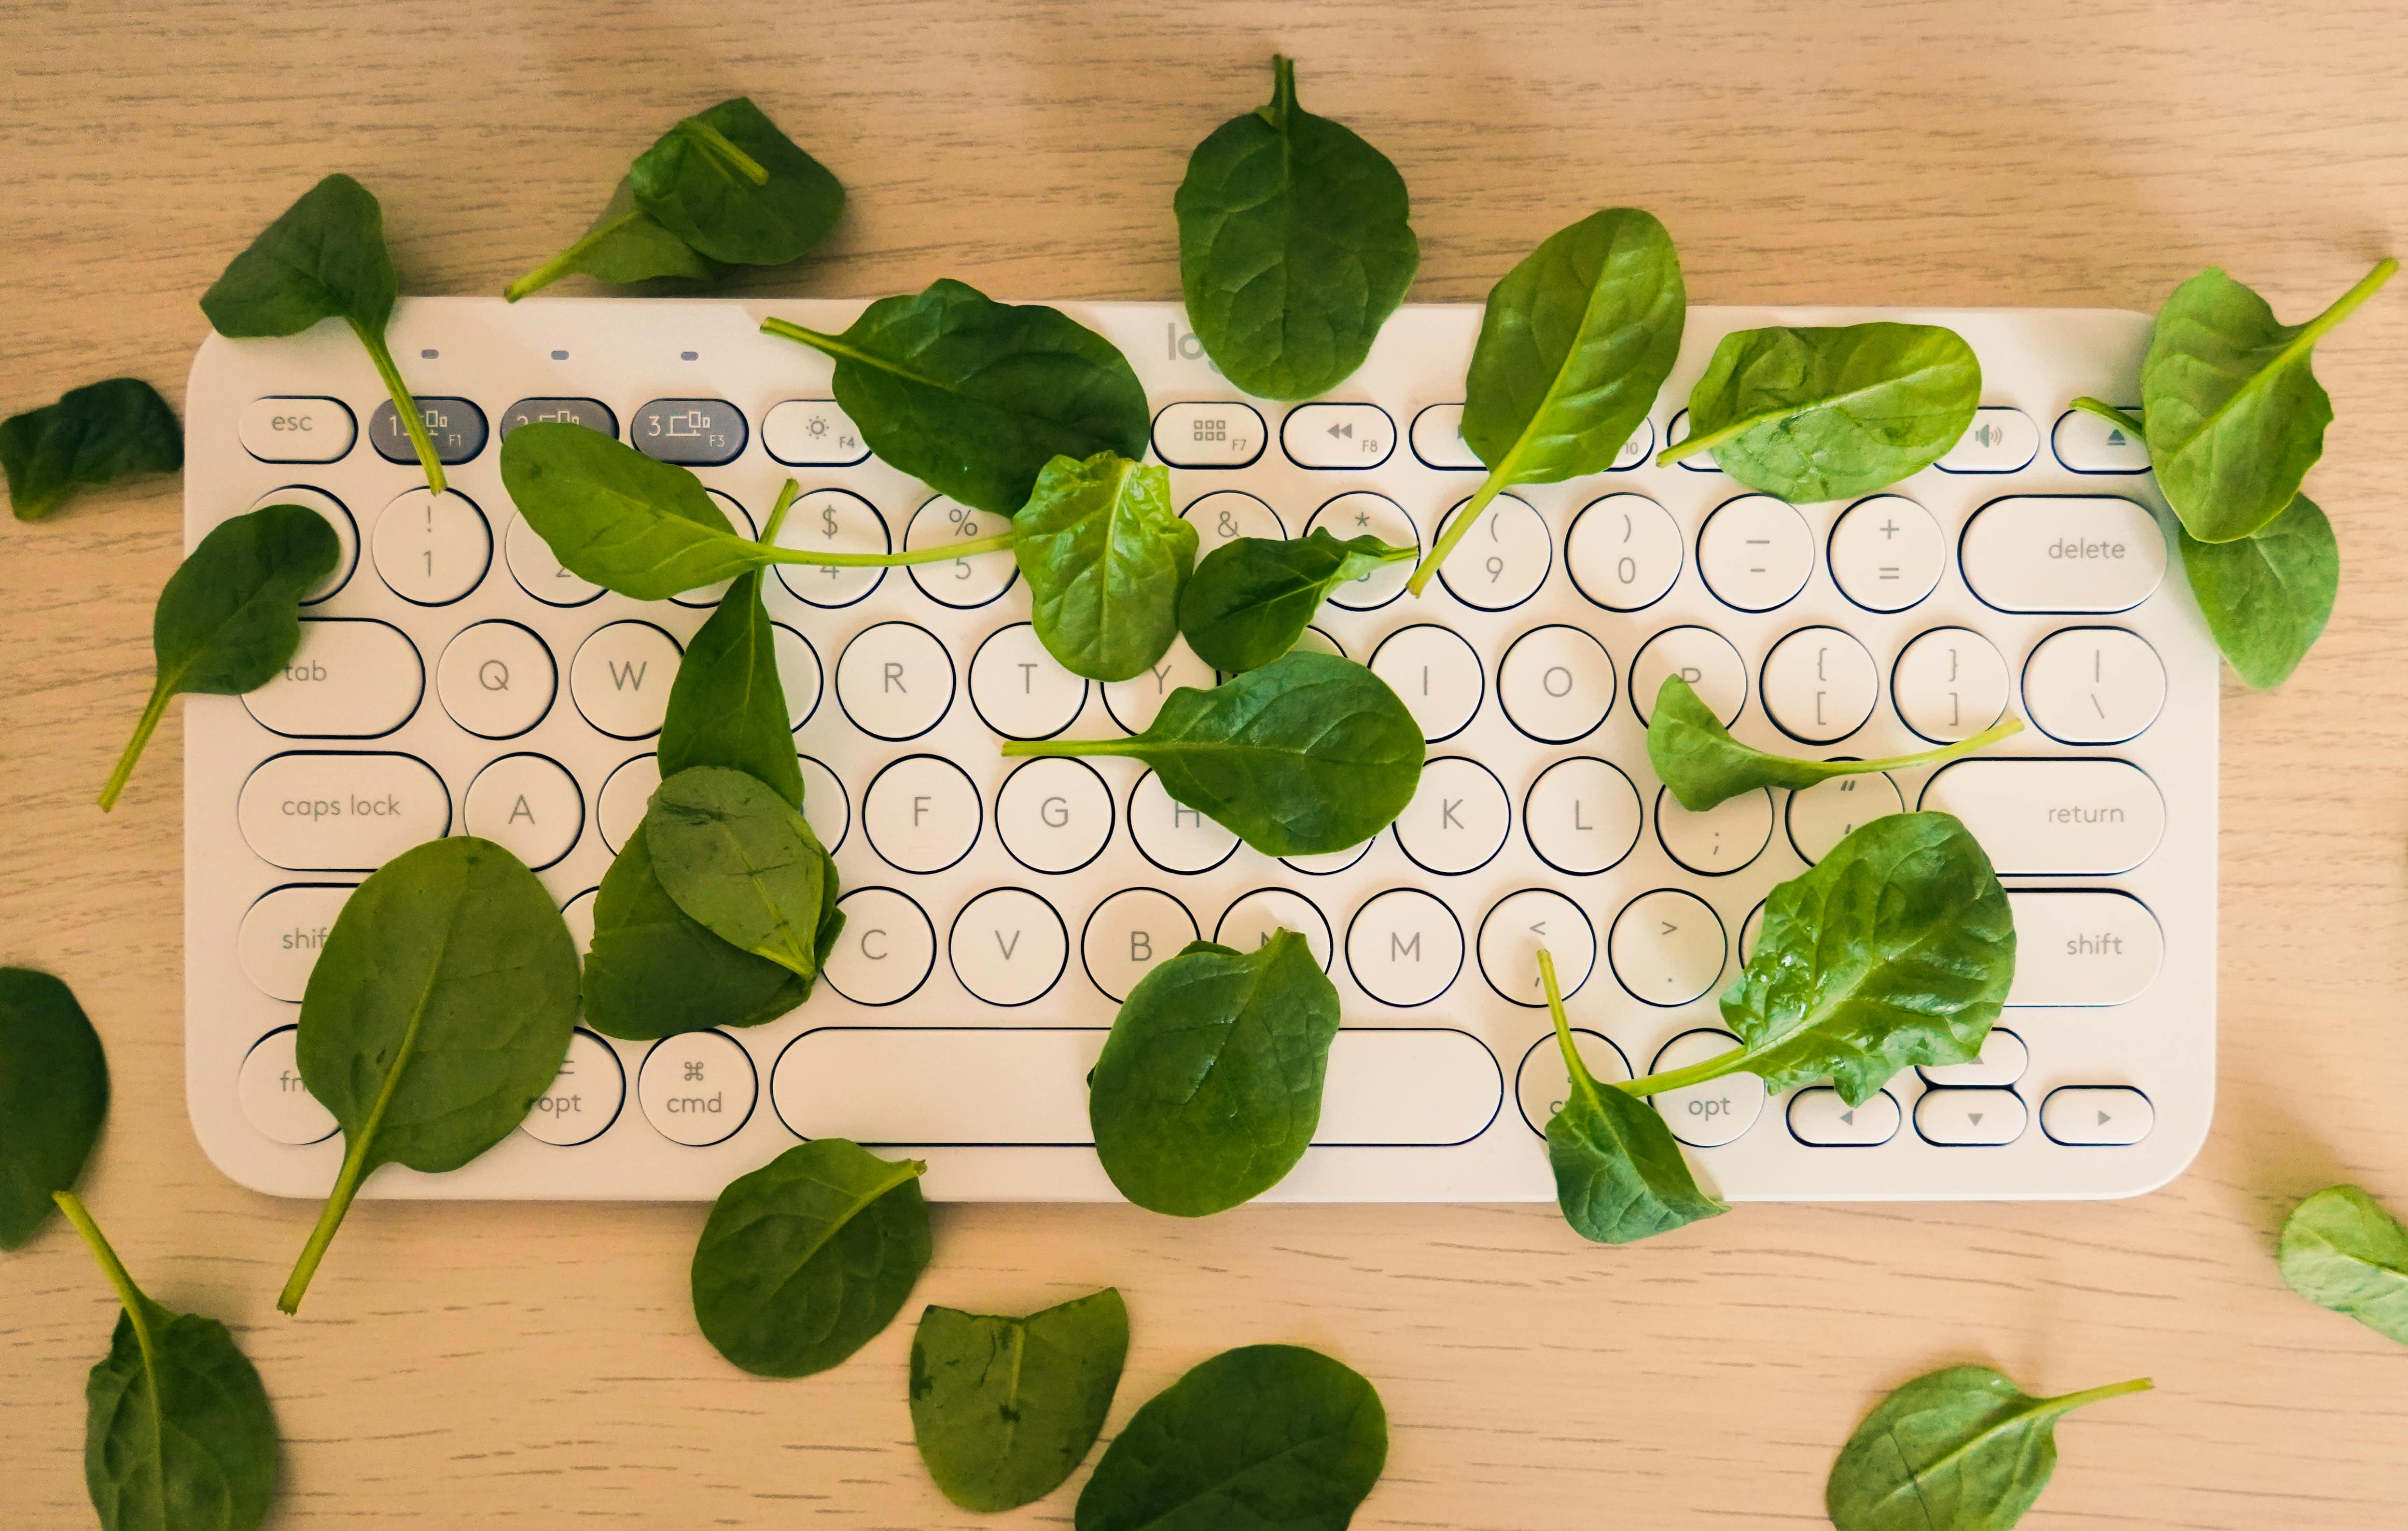 When Spinach Meets Technology: The Leafy Green that Sent Emails